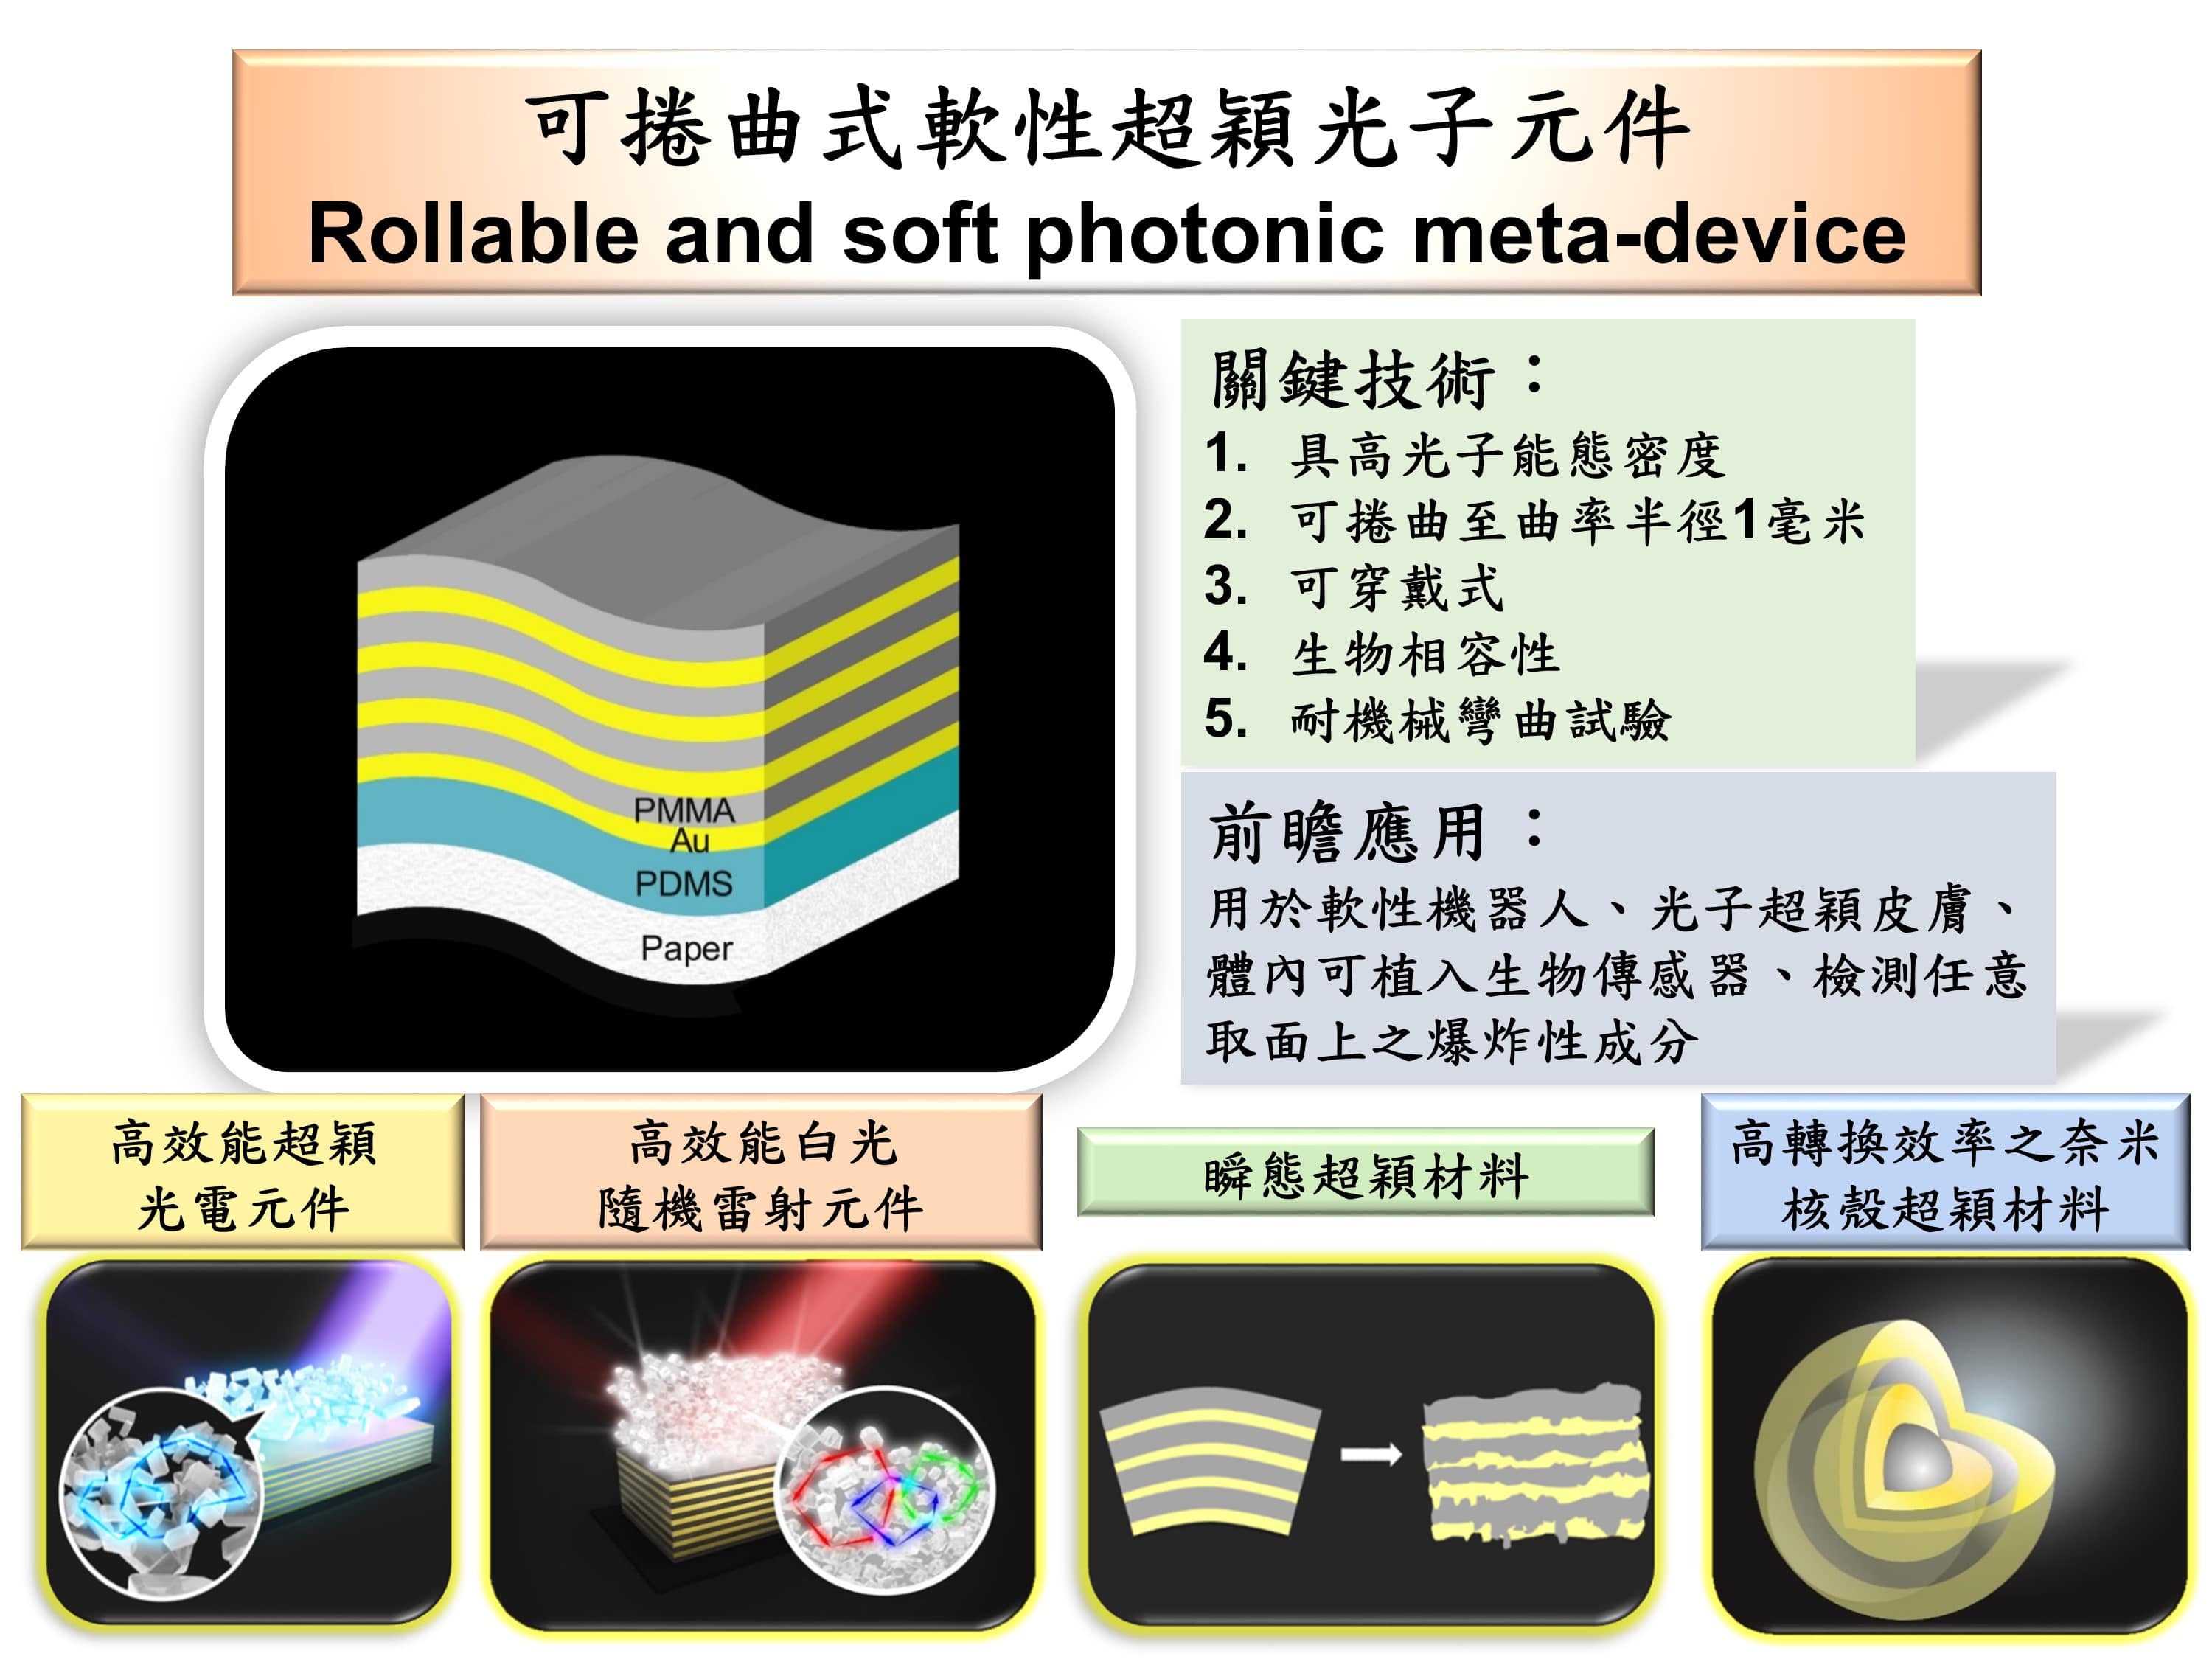 Rollable and soft photonic meta-device